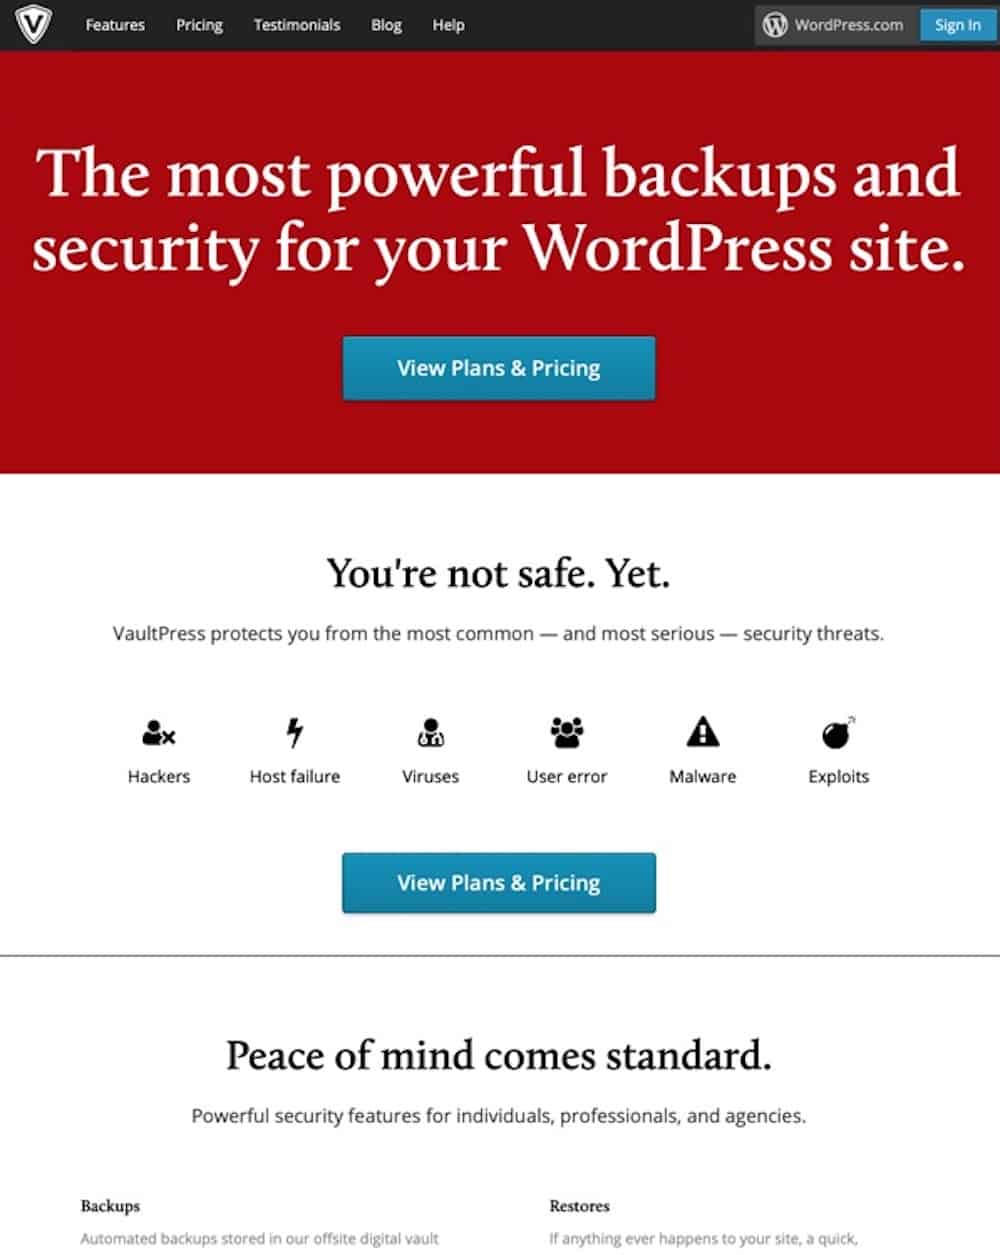 VaultPress is a subscription-based protection, security and backup service for WordPress blogs and sites. Built on the same Automattic grid that serves over 32 million WordPress.com blogs and 330 million monthly visitors, VaultPress secures your site.